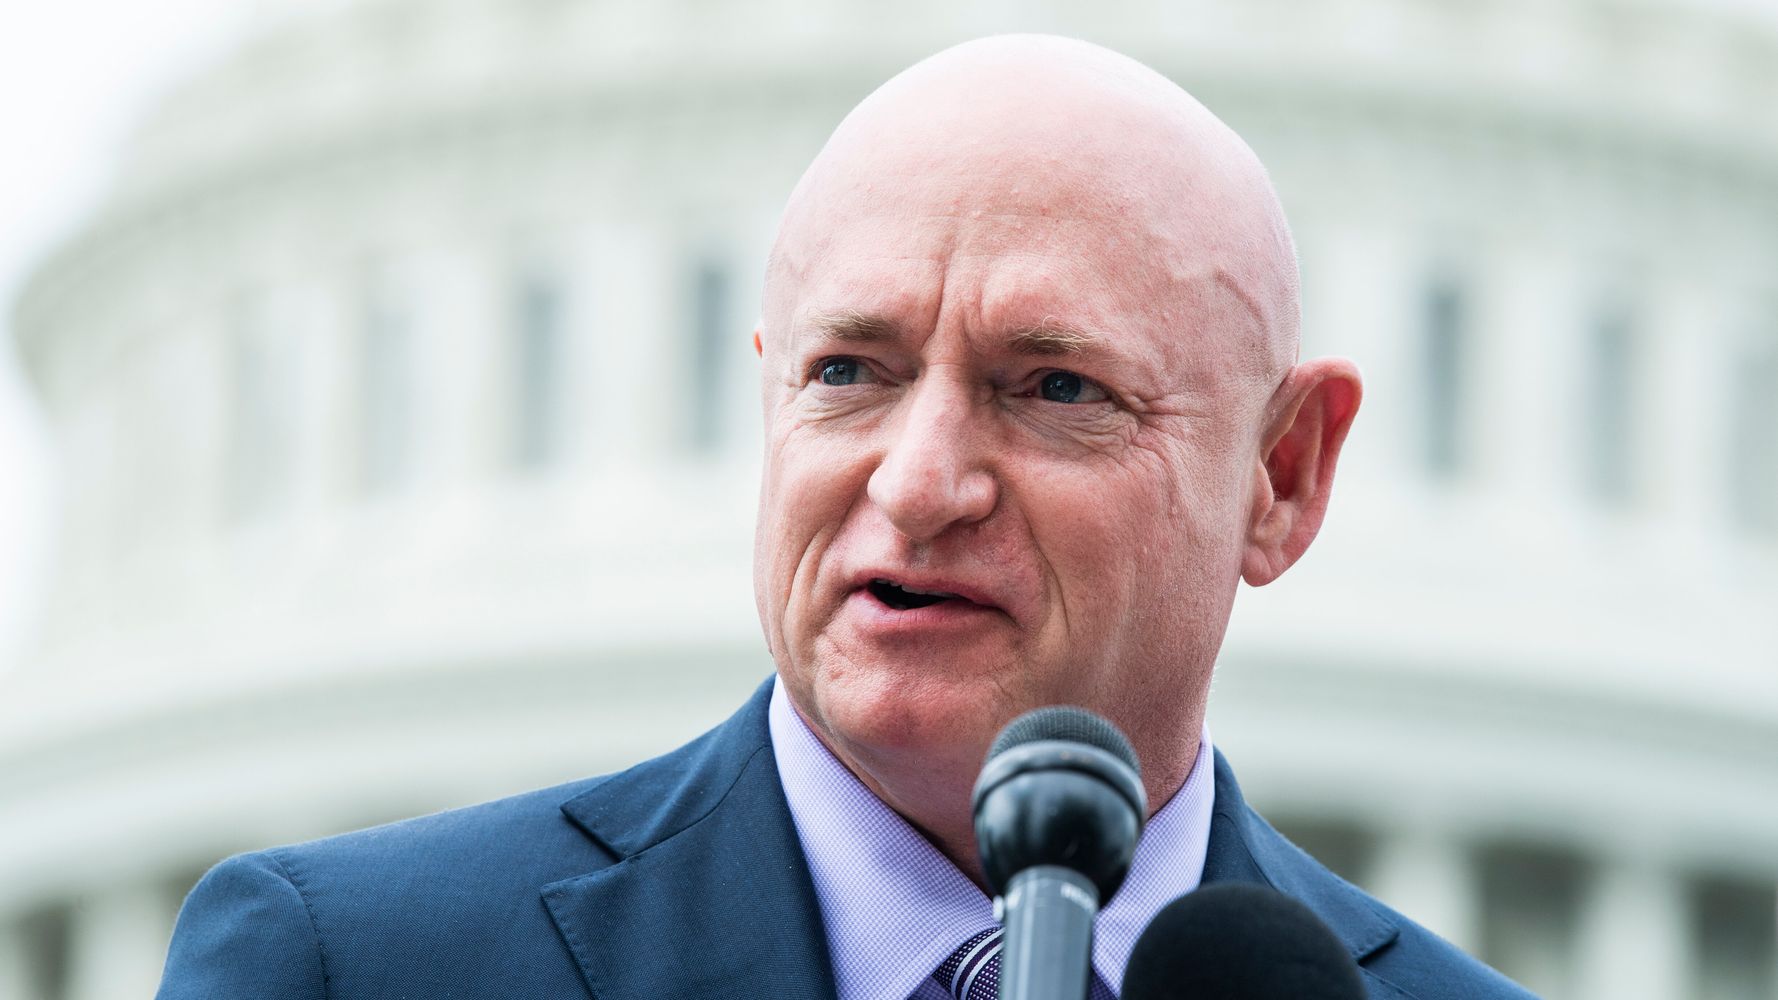 Senator Mark Kelly Says He Supports ‘Overall Goals’ Of PRO Act